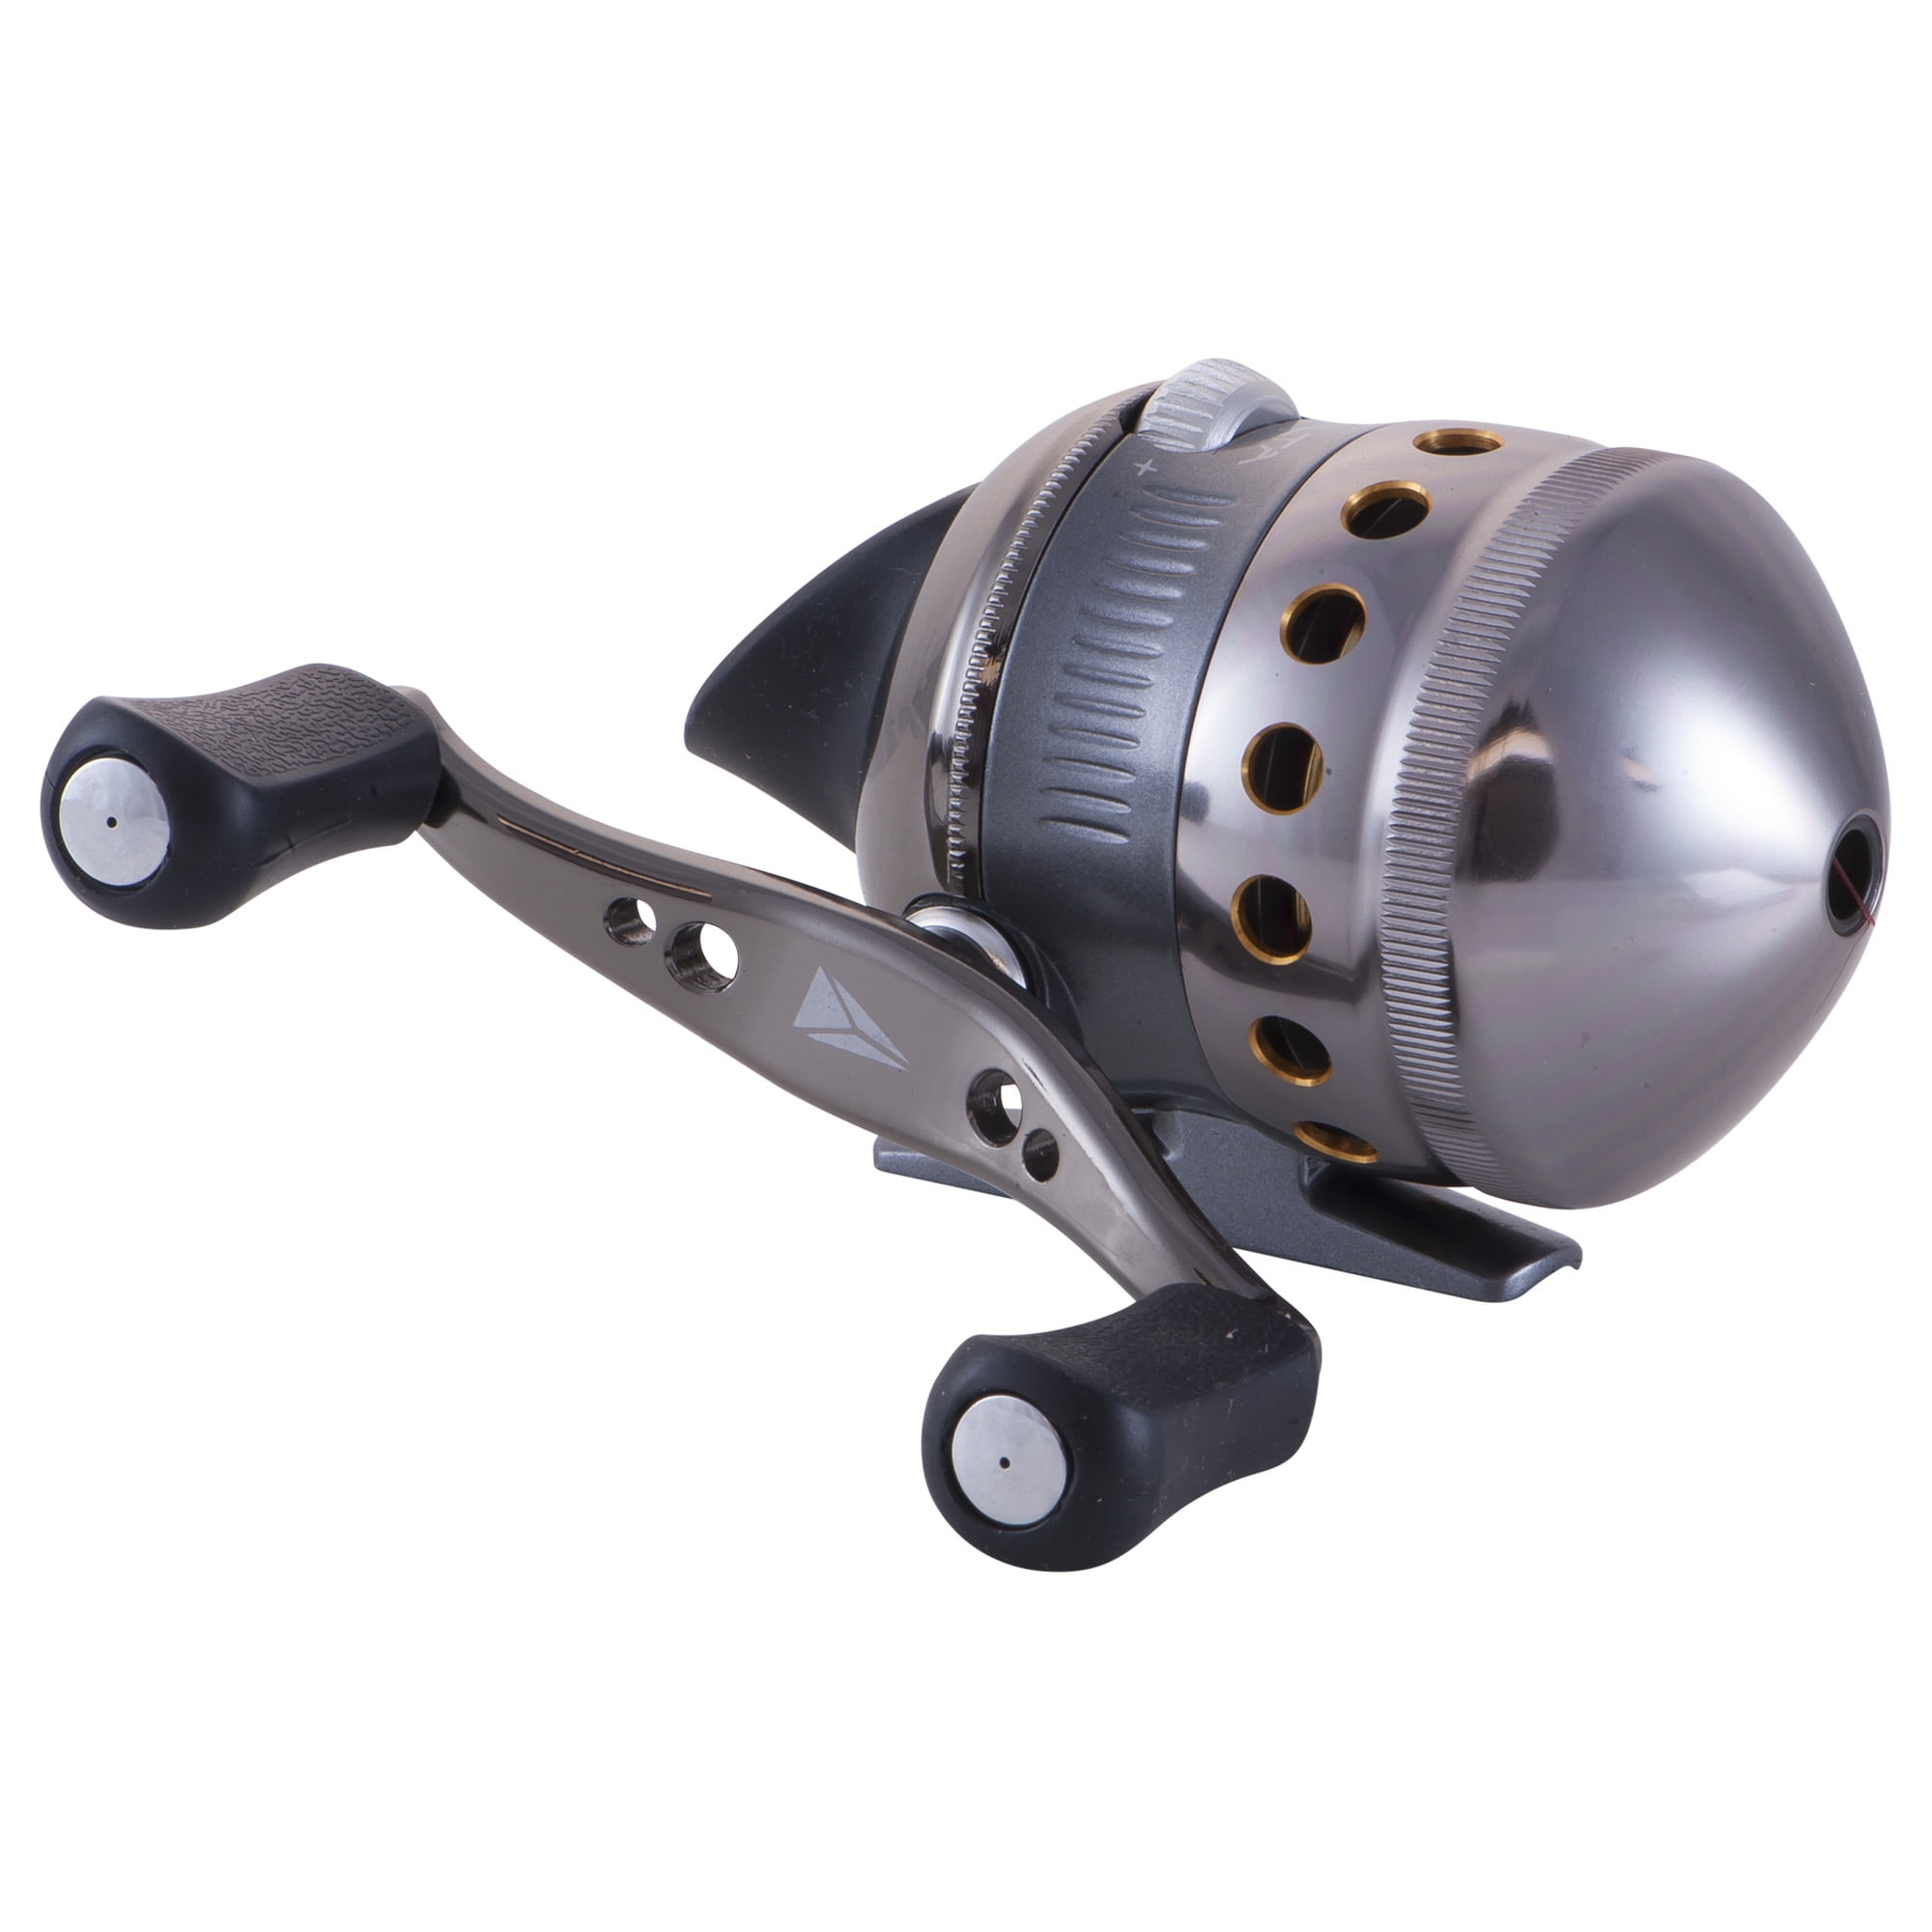 Zebco Delta Spincast Fishing Reel, Size 30 Reel, Changeable Right